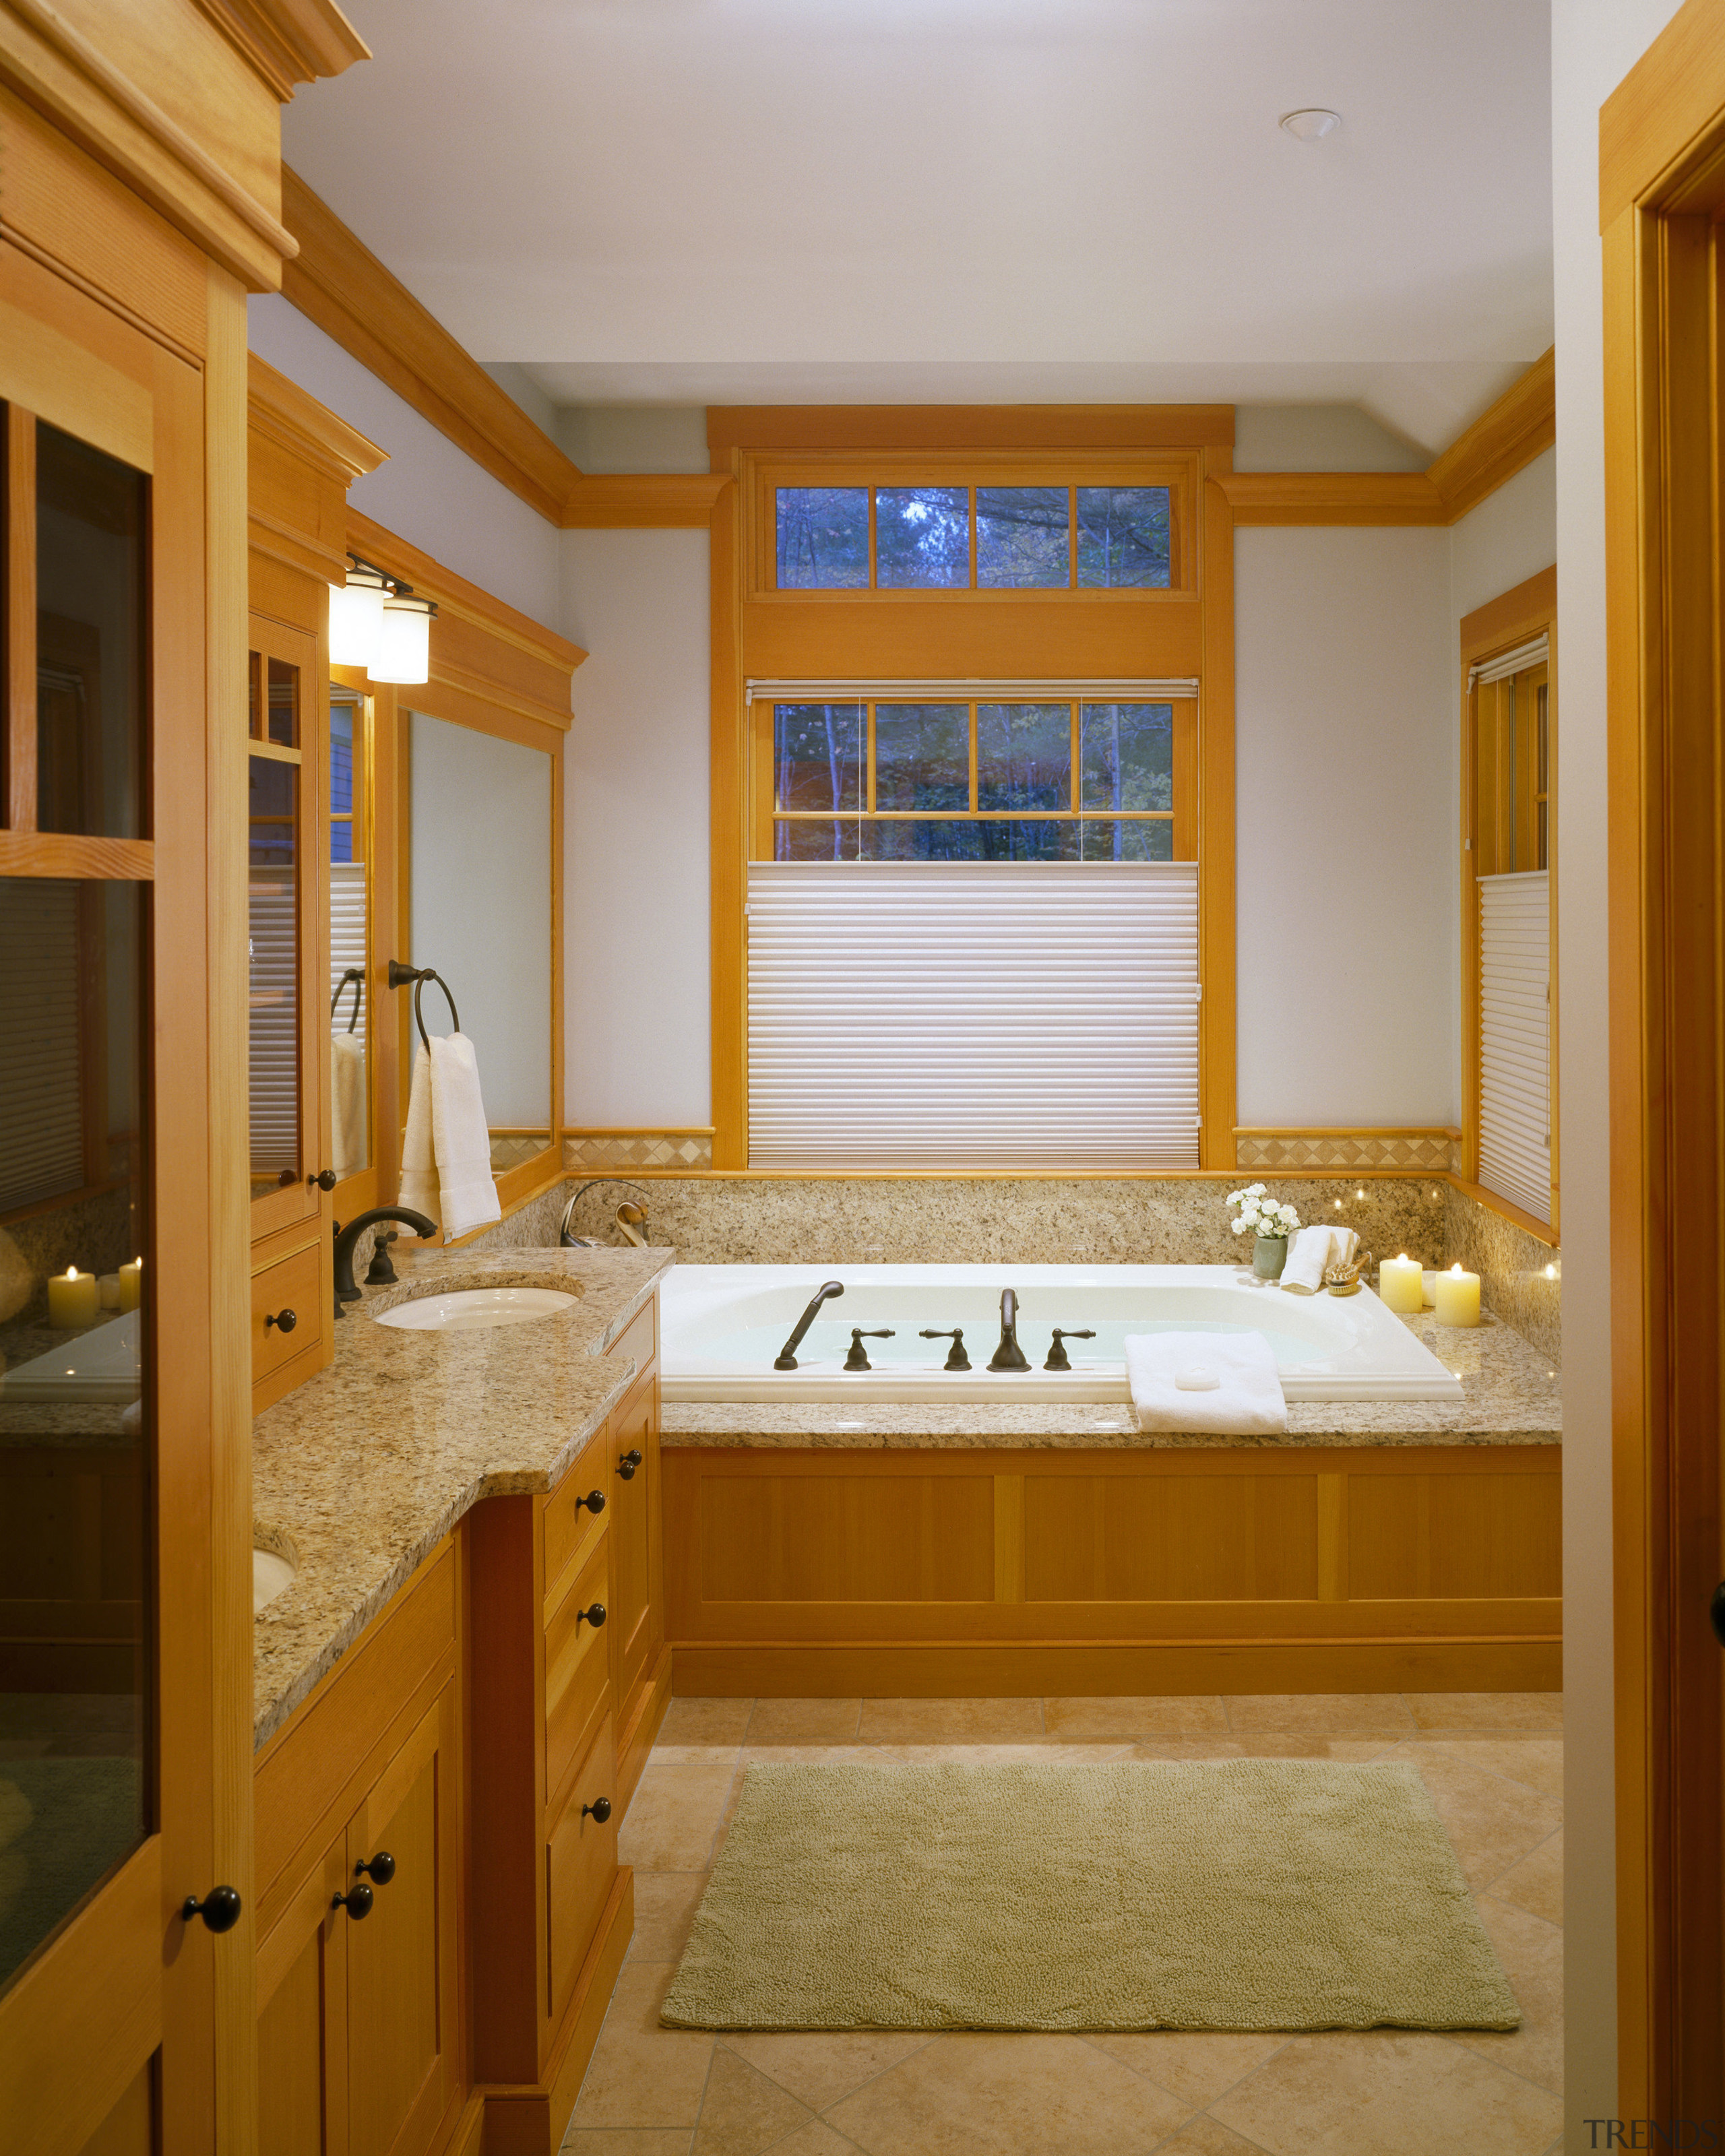 View of bathroom featuring wood joinery and tiled bathroom, cabinetry, countertop, estate, home, interior design, real estate, room, suite, window, brown, orange